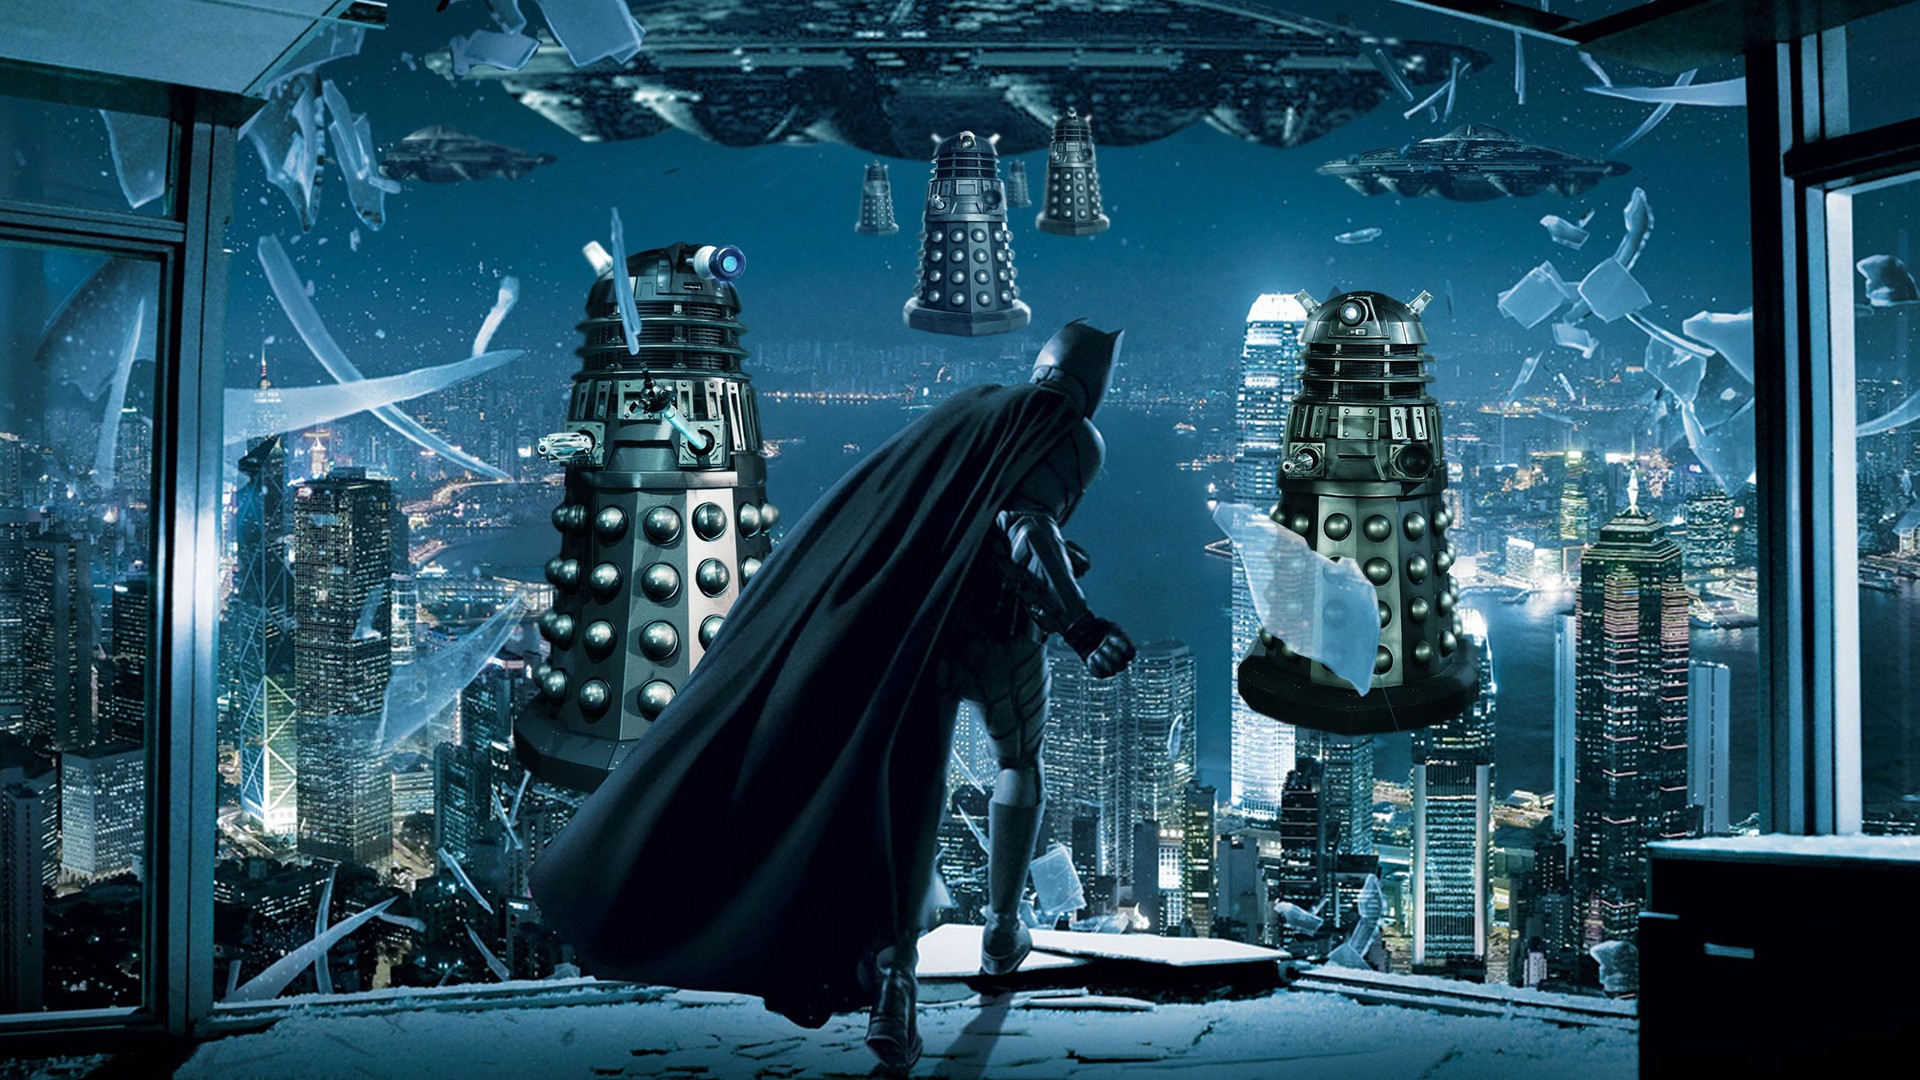 The Dark Knight Rises Doctor Who Daleks Crossover 1920x1080